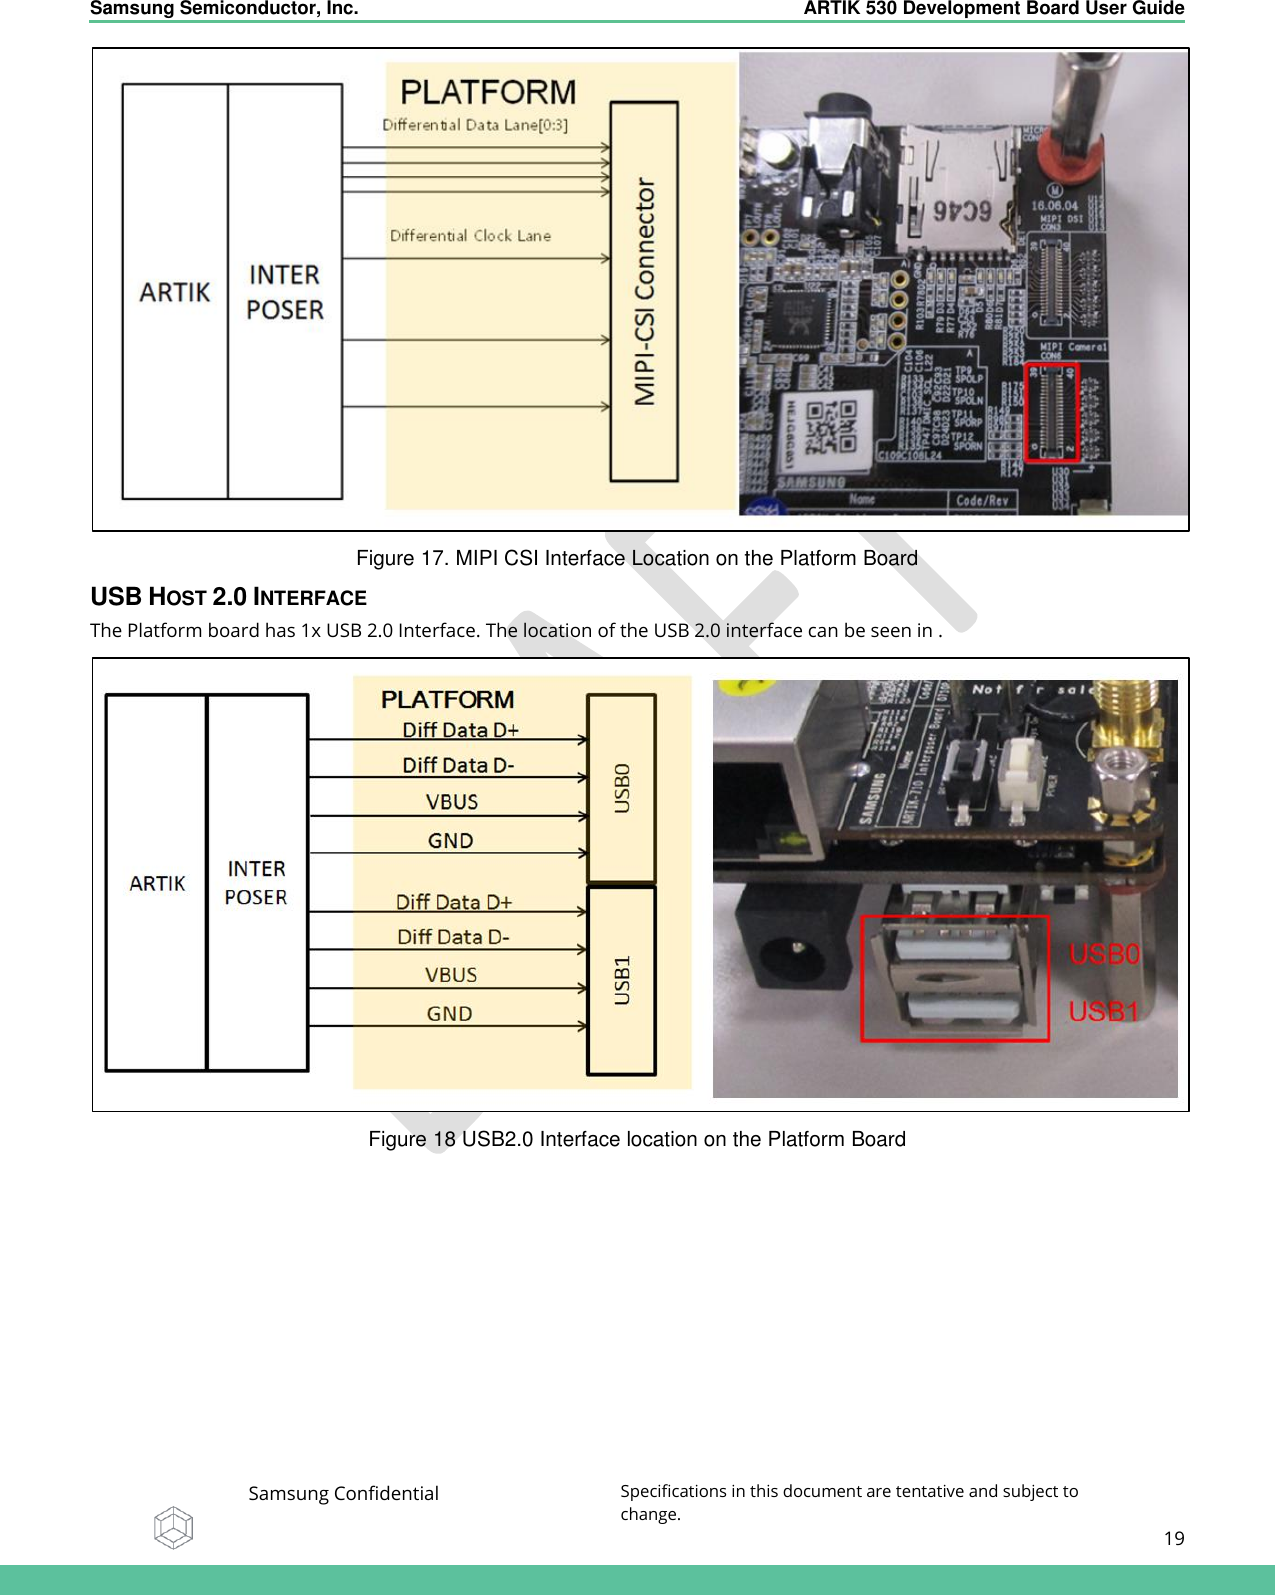    Samsung Semiconductor, Inc.  ARTIK 530 Development Board User Guide   Samsung Confidential Specifications in this document are tentative and subject to change.  19    Figure 17. MIPI CSI Interface Location on the Platform Board USB HOST 2.0 INTERFACE The Platform board has 1x USB 2.0 Interface. The location of the USB 2.0 interface can be seen in .  Figure 18 USB2.0 Interface location on the Platform Board   